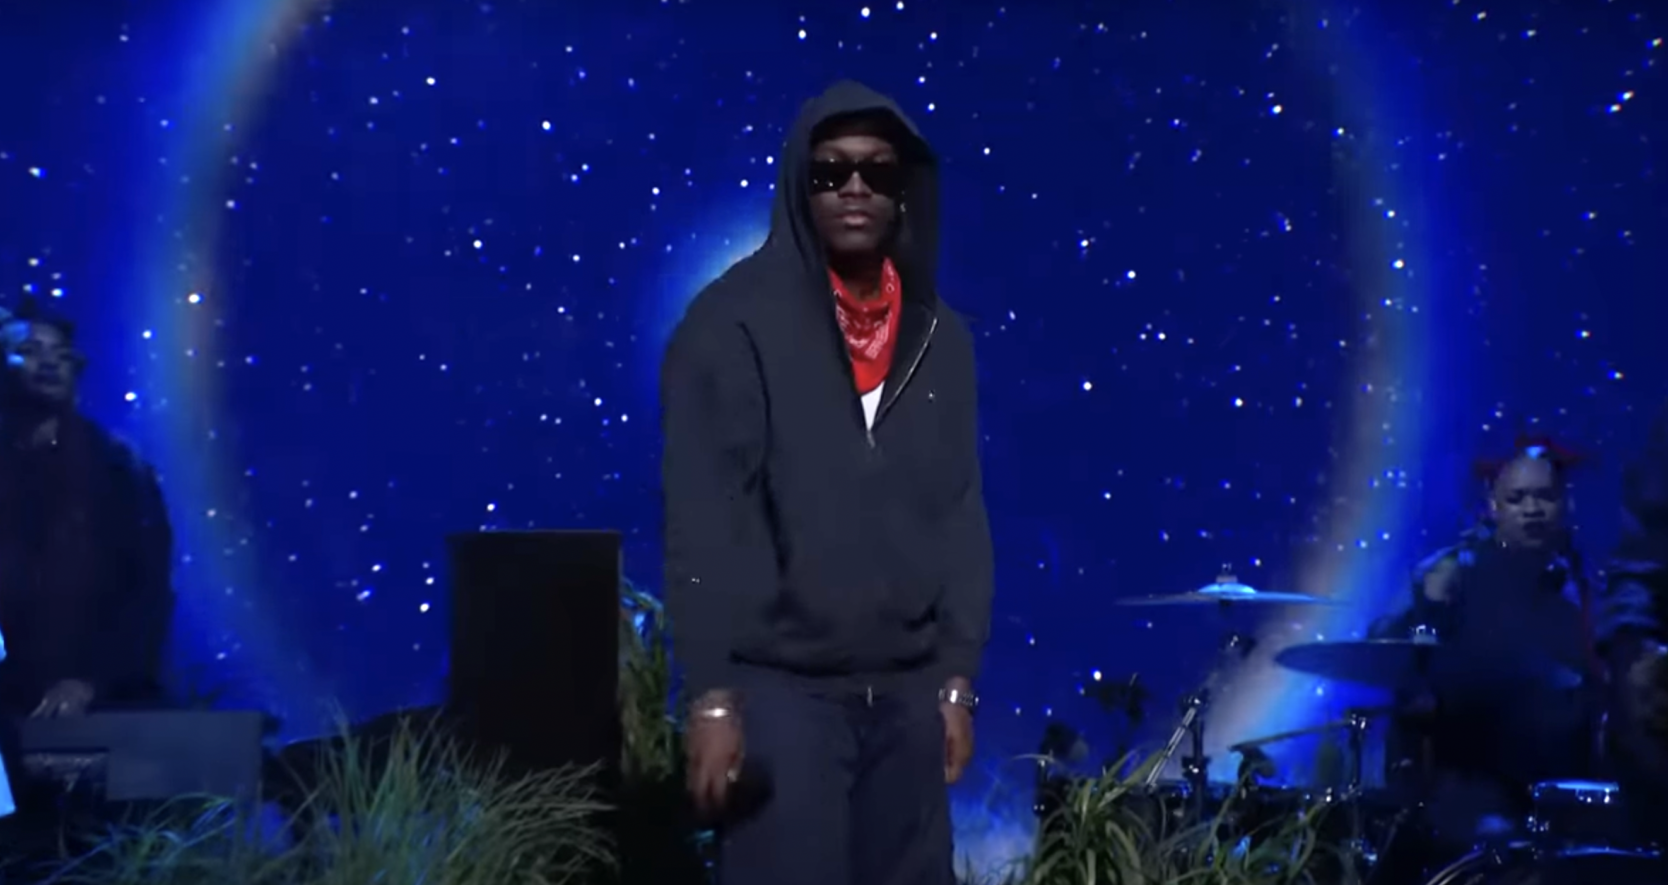 Lil Yachty Makes 'SNL' Debut, Performs 'Let's Start Here' Tracks